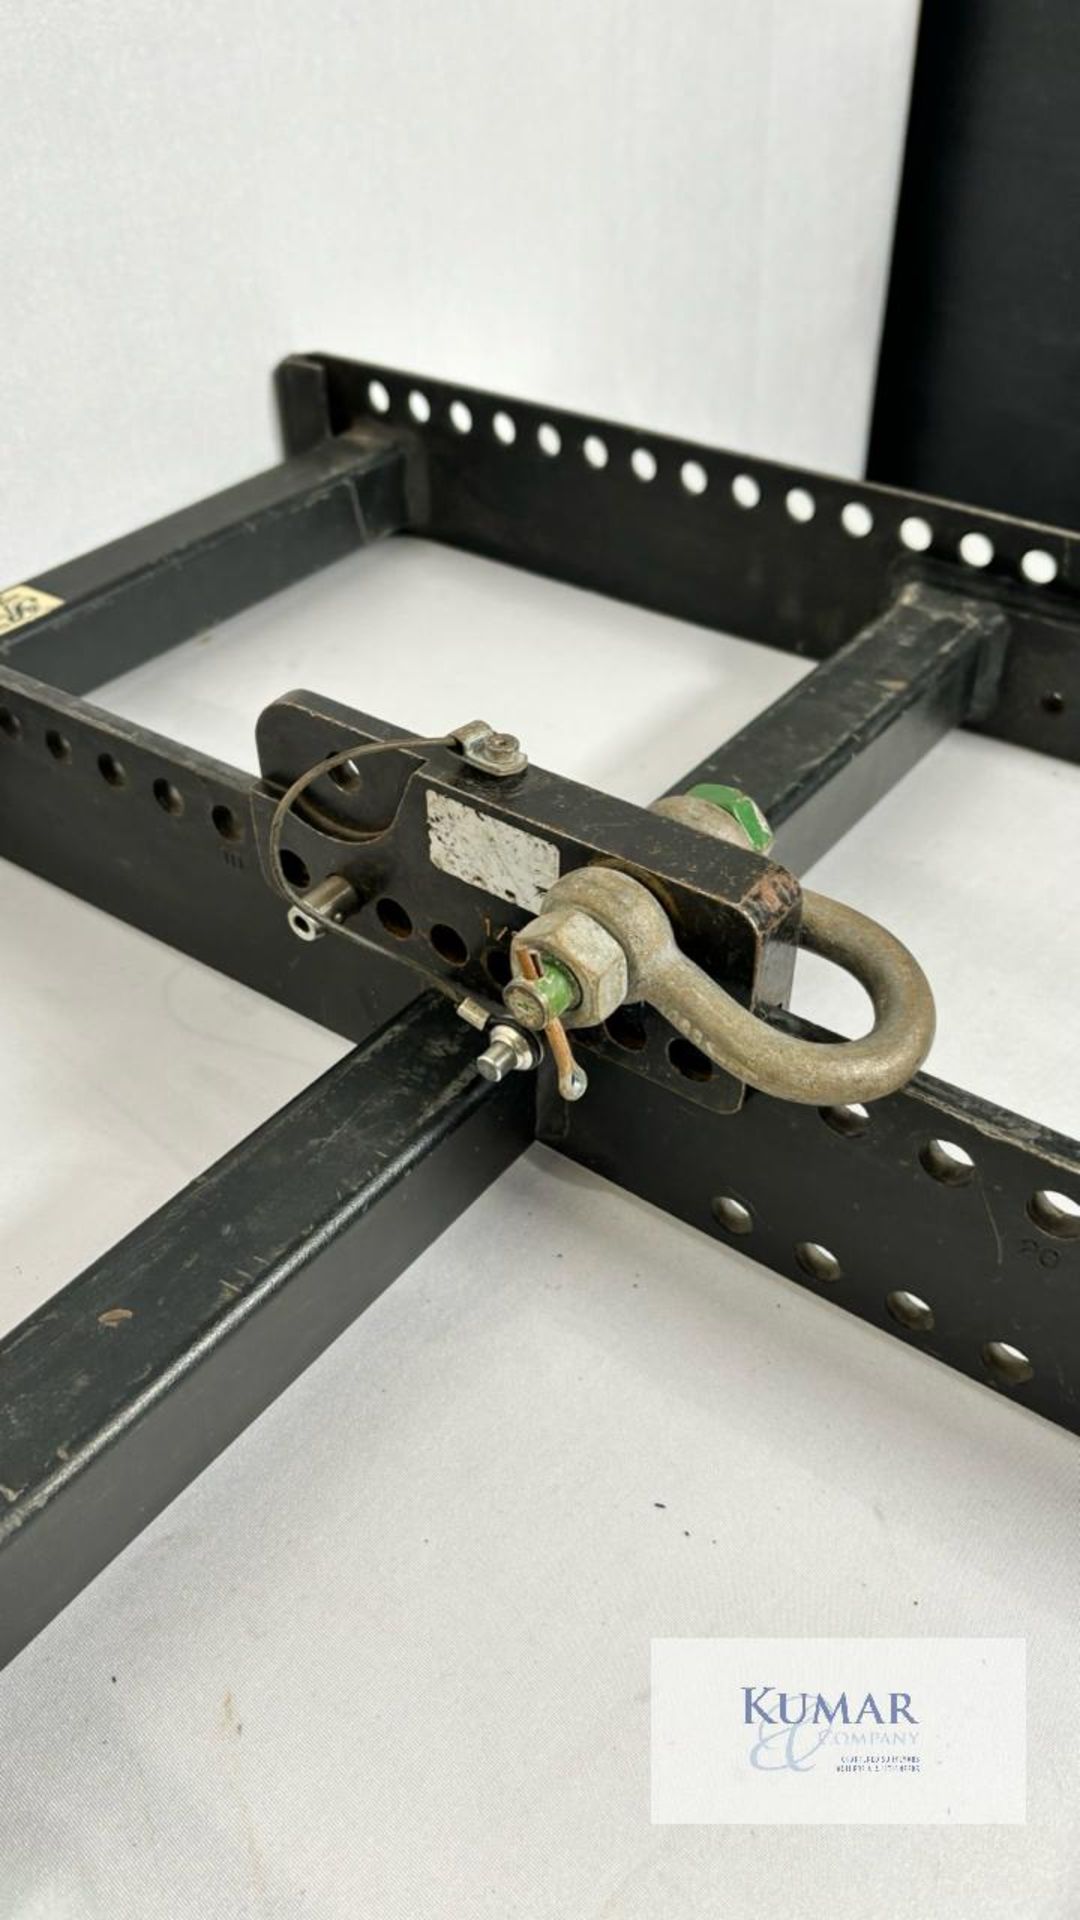 2 x D&B Q1 Flying Frames with D&B load adaptors Function condition - frame and load adaptors - Image 8 of 9